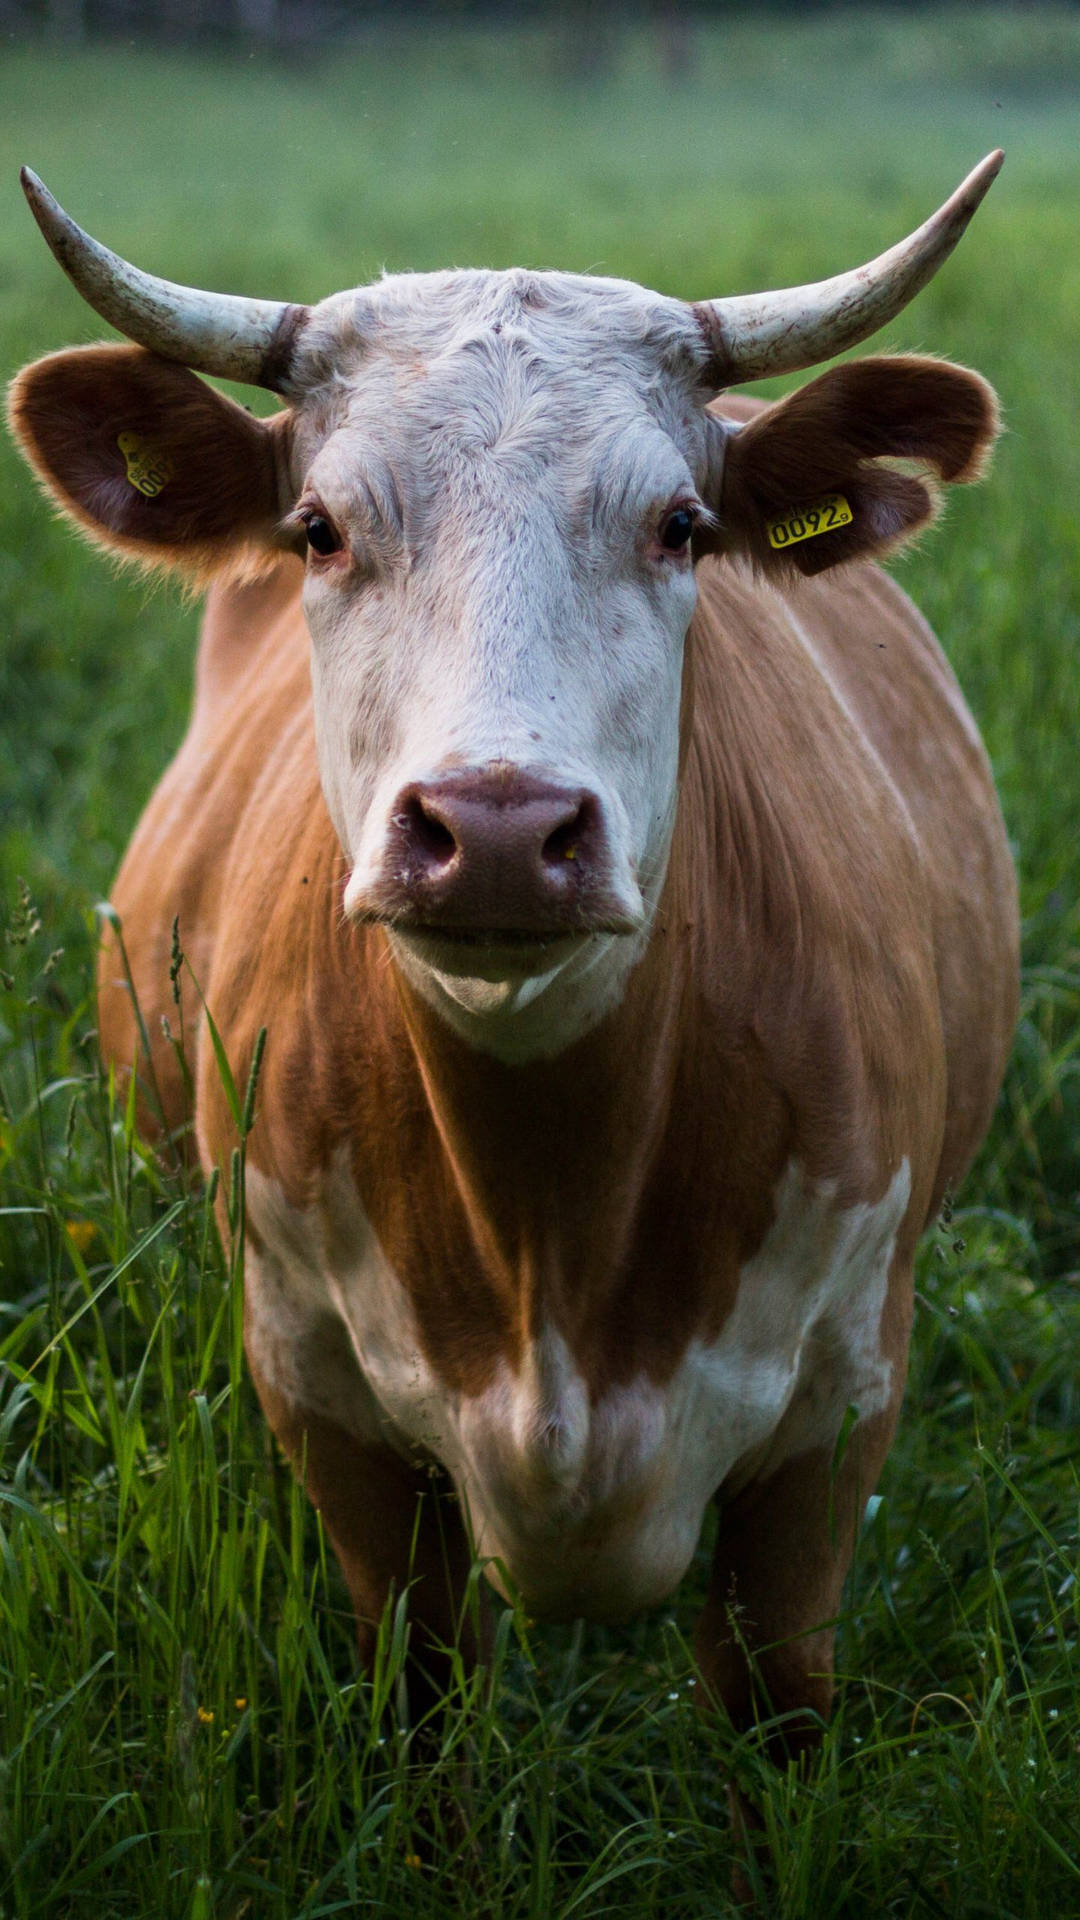 “this Beautiful Cow With Big Horns Is Ready To Graze.”